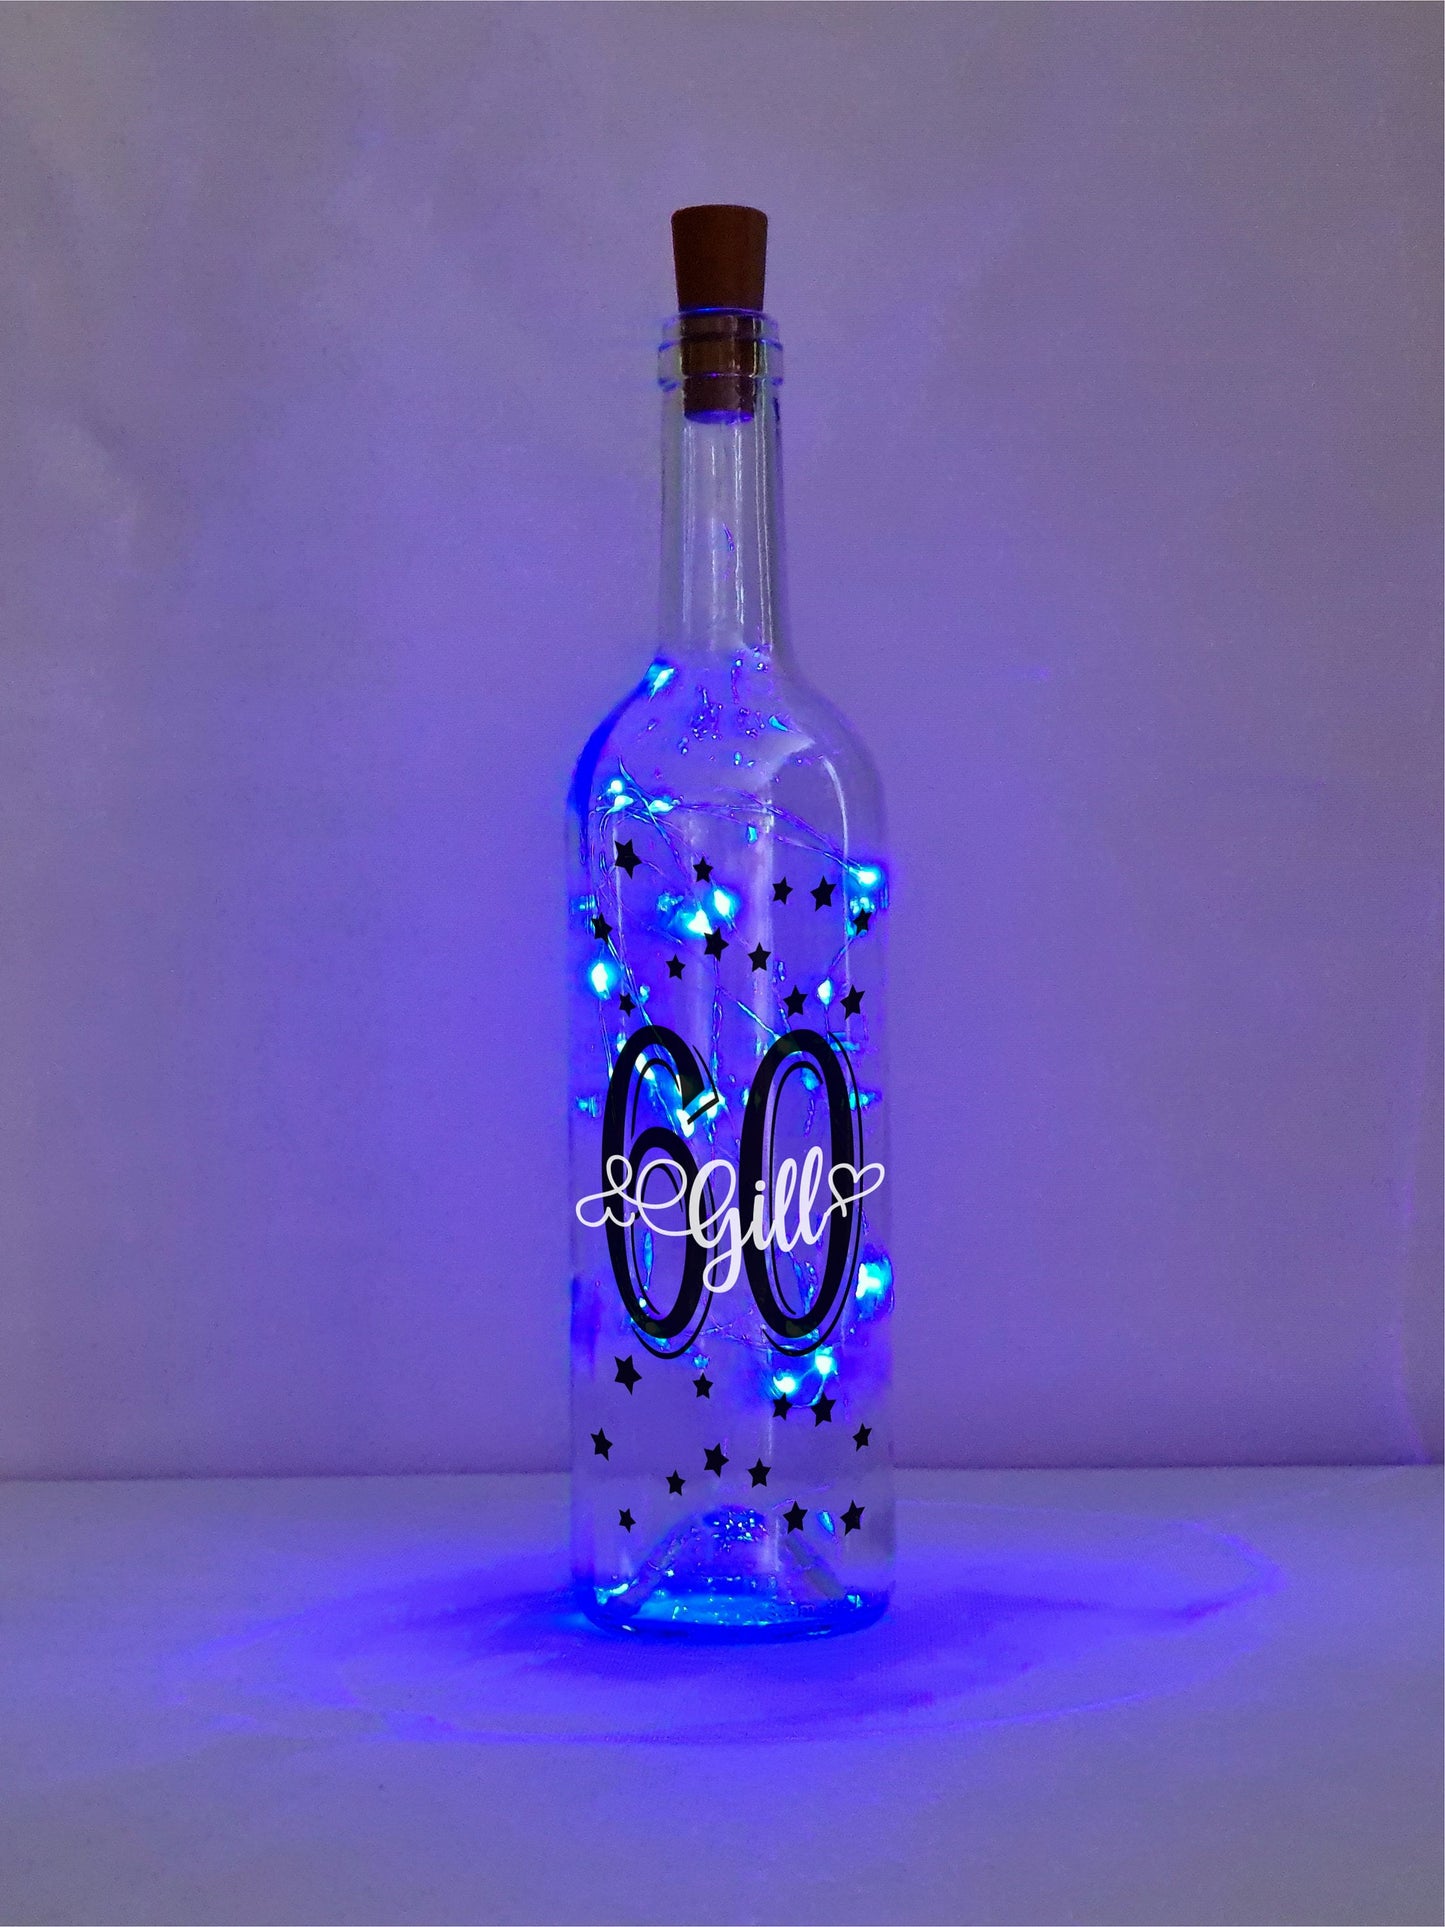 Personalised 60th Birthday Gift For Her, Stars Design, Light Up Wine Bottle, Birthday Gift For Woman, Best Friend Present,Daughters Birthday